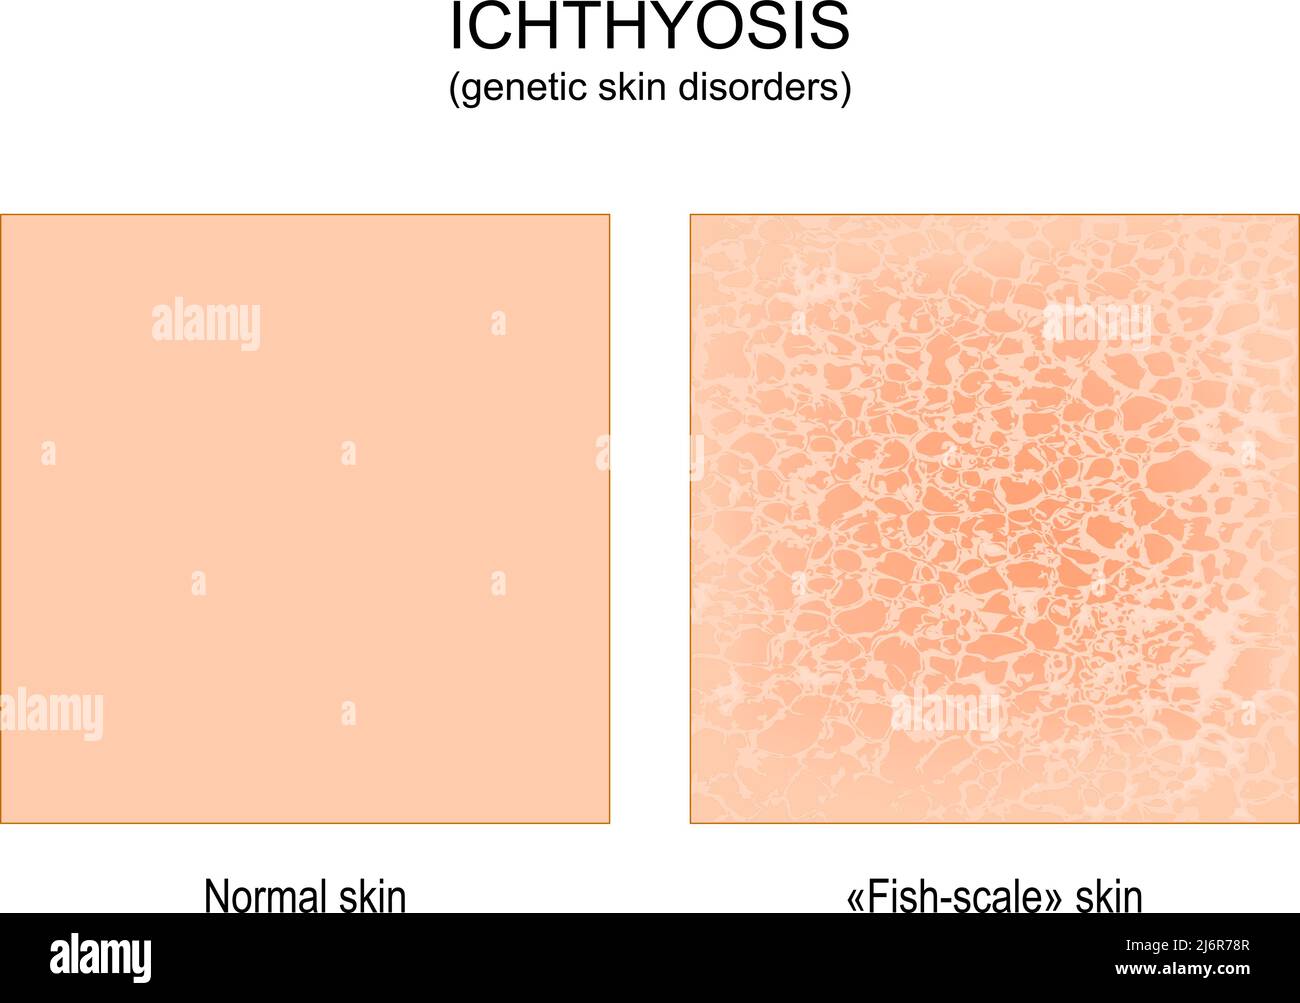 Ichthyosis. genetic skin disorders. Normal and skin of a person with ichthyosis is rough, dry and scaly. 'fish-scale' skin. vector illustration Stock Vector